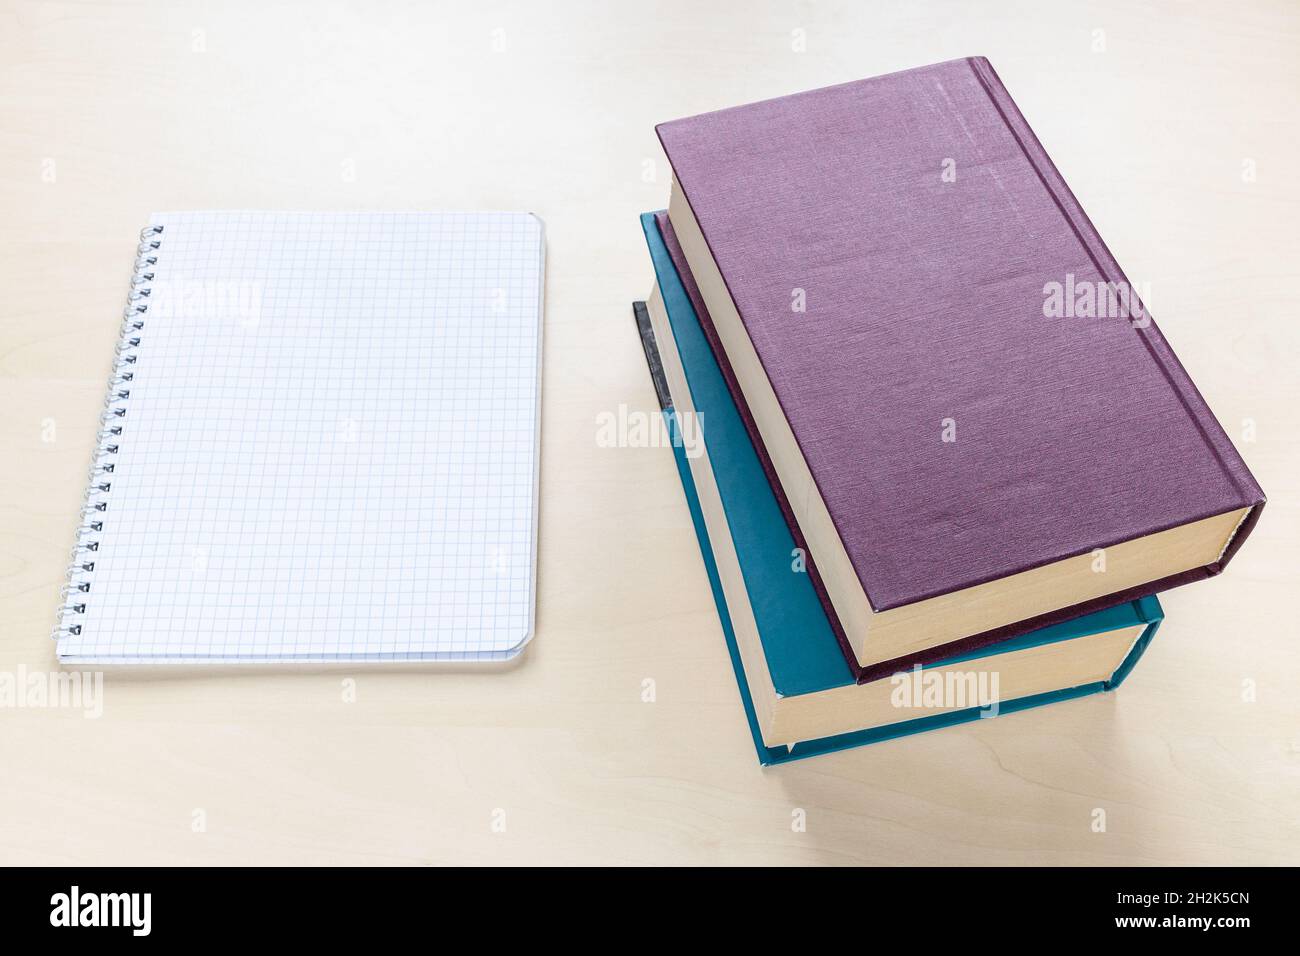 above view of two thick books and blank spiral notebook with squared paper on light brown wooden board Stock Photo